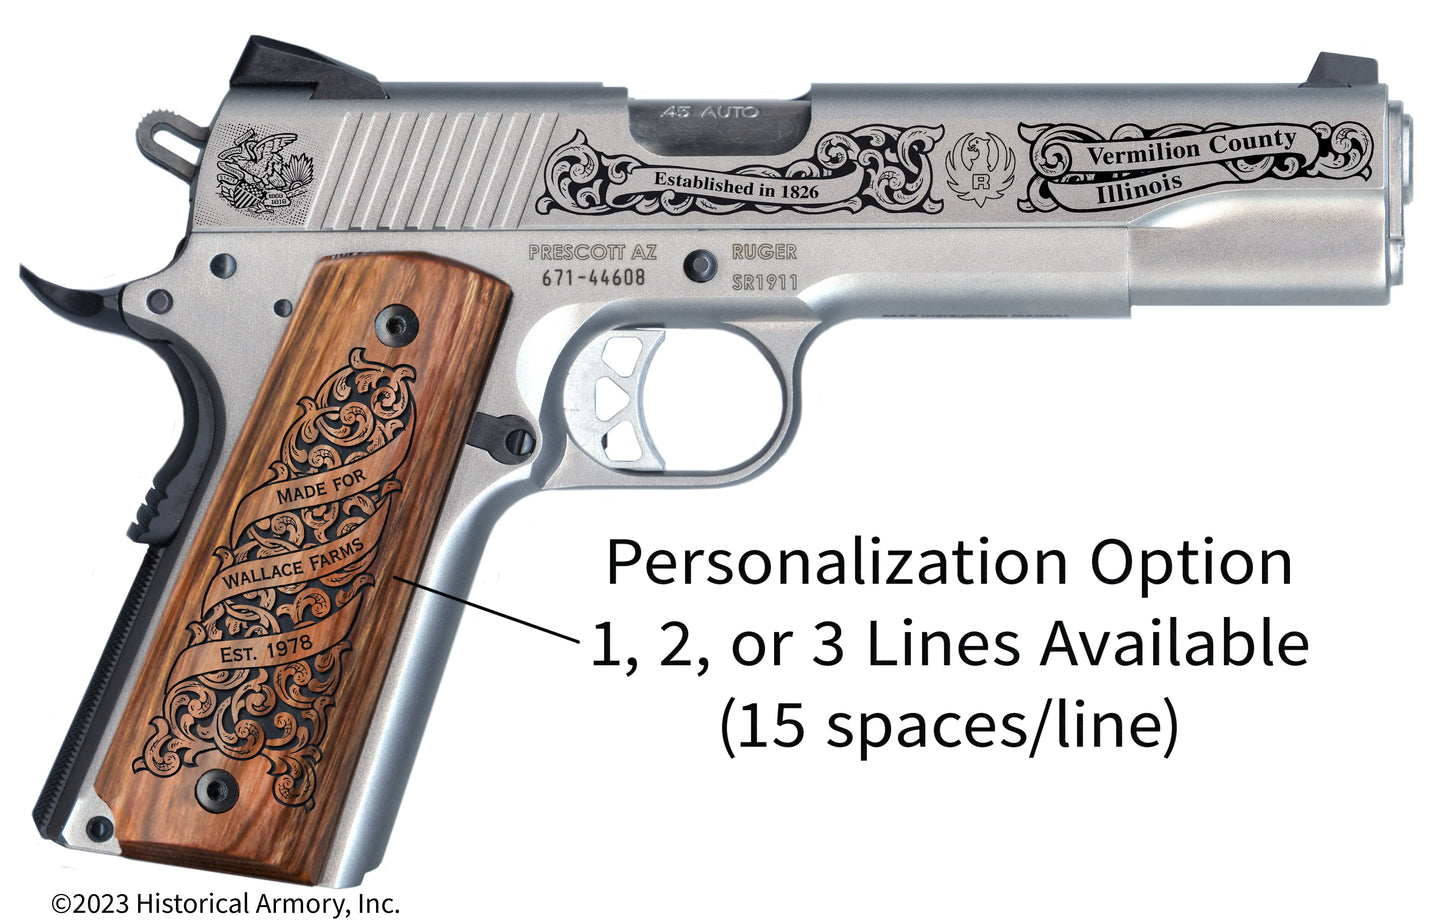 Vermilion County Illinois Personalized Engraved .45 Auto Ruger 1911